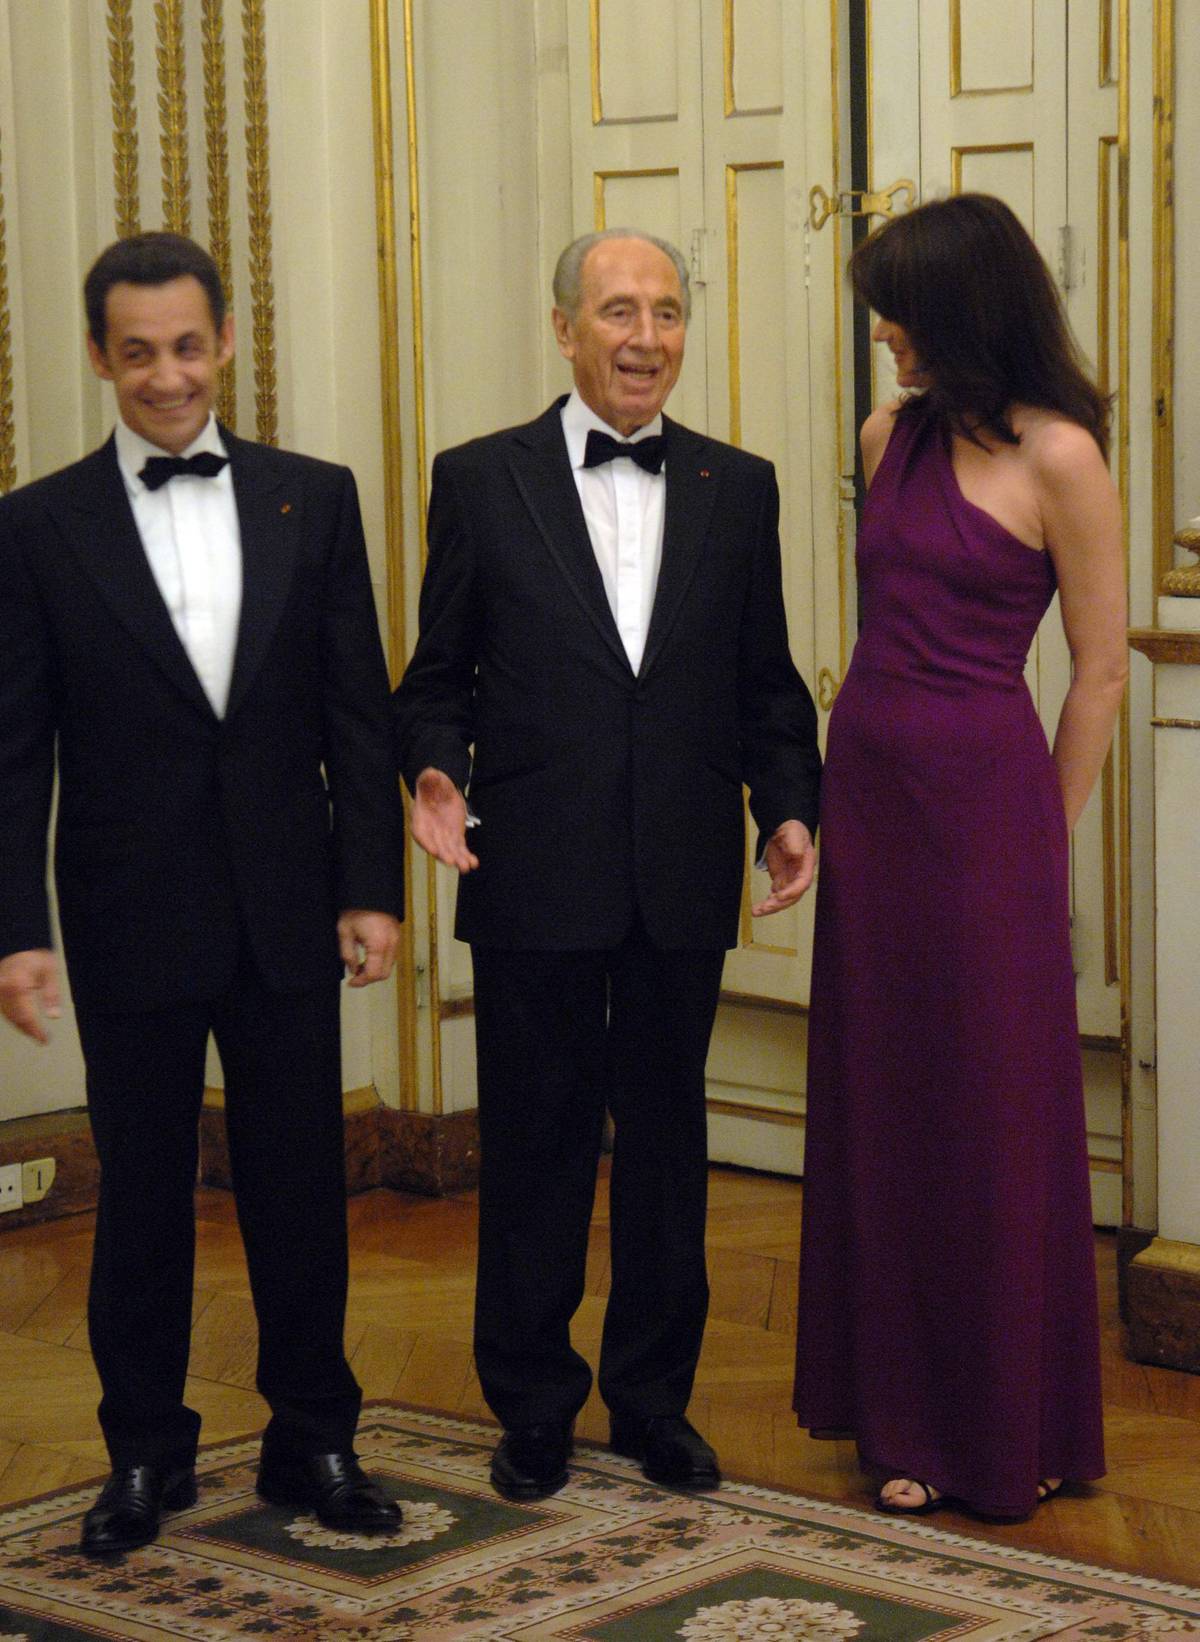 ‘In his own life, many of his most unlikely dreams had in fact become reality.’ Shimon Peres at Elysee Palace, Paris, France, March 2008. 